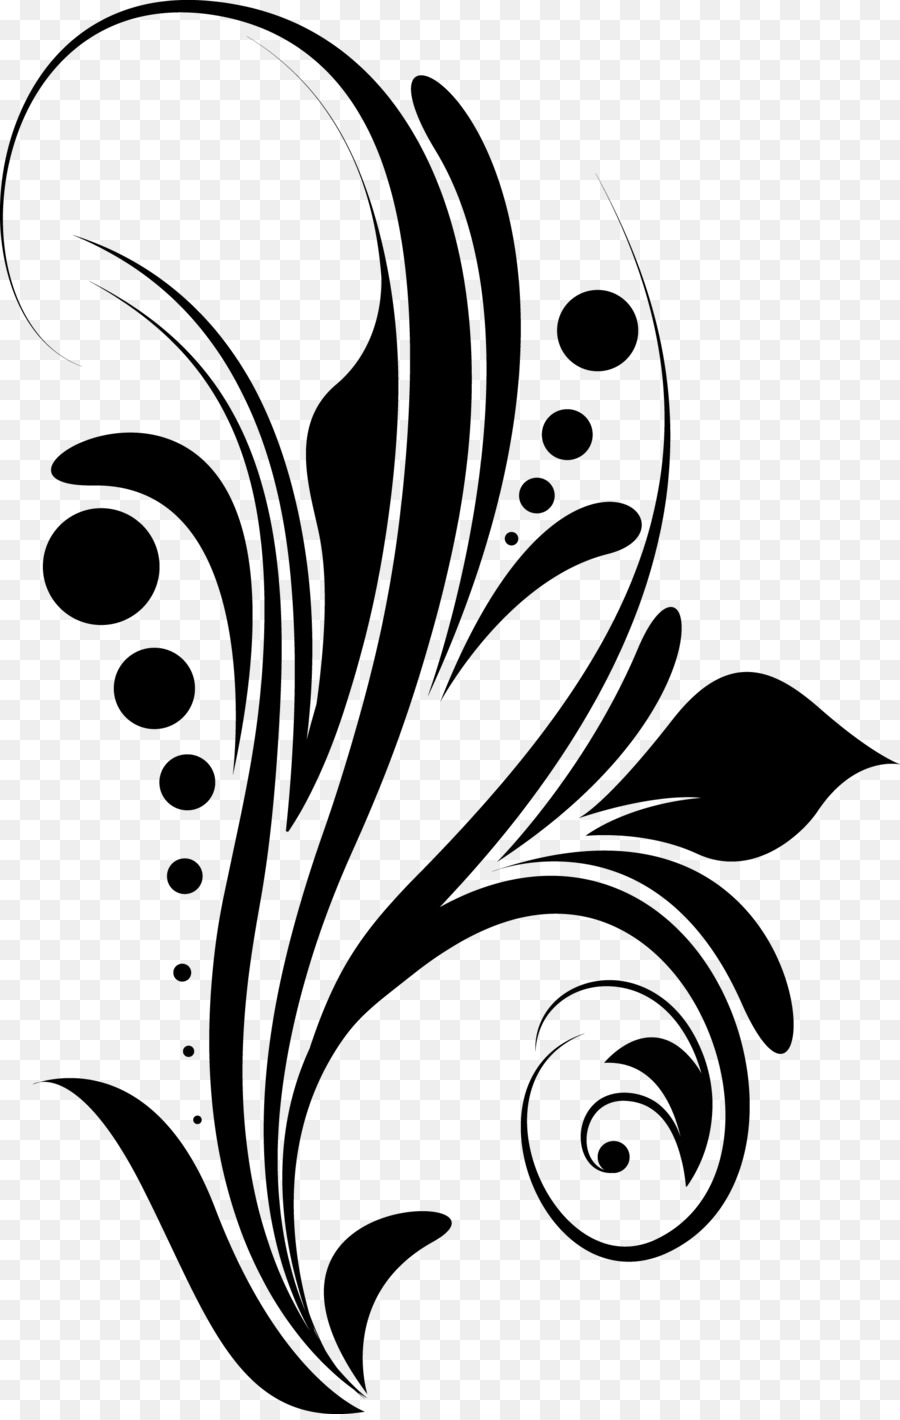 Floral Design Background Vector Black And White